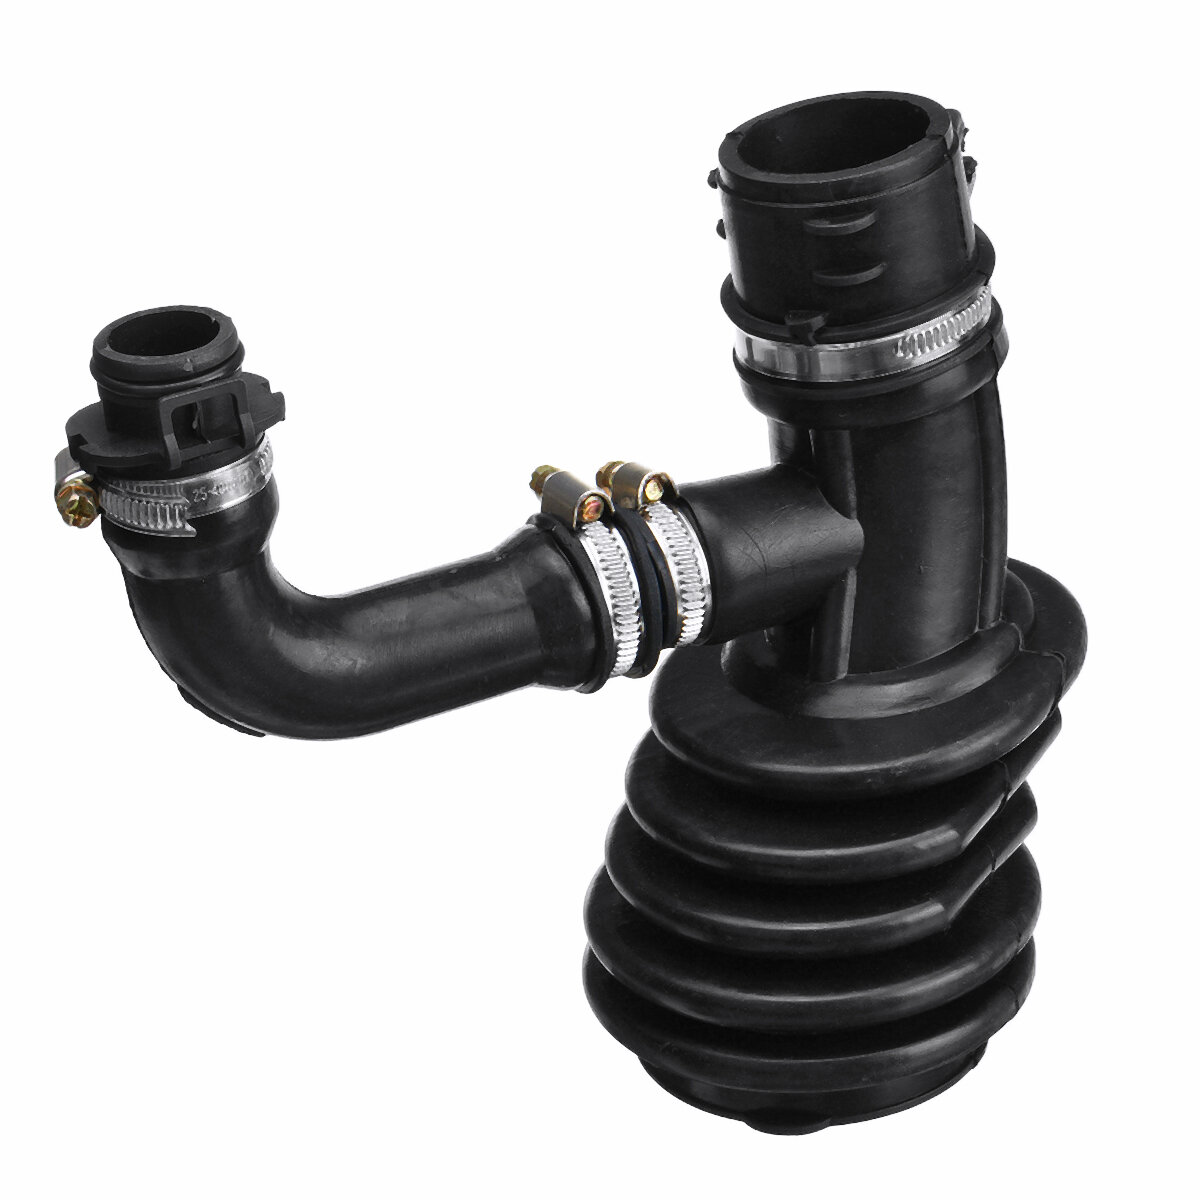 Luchtfilter Flow Intake Hose Pipe Voor Ford Focus MK2 C-Max 1.6 TDCI